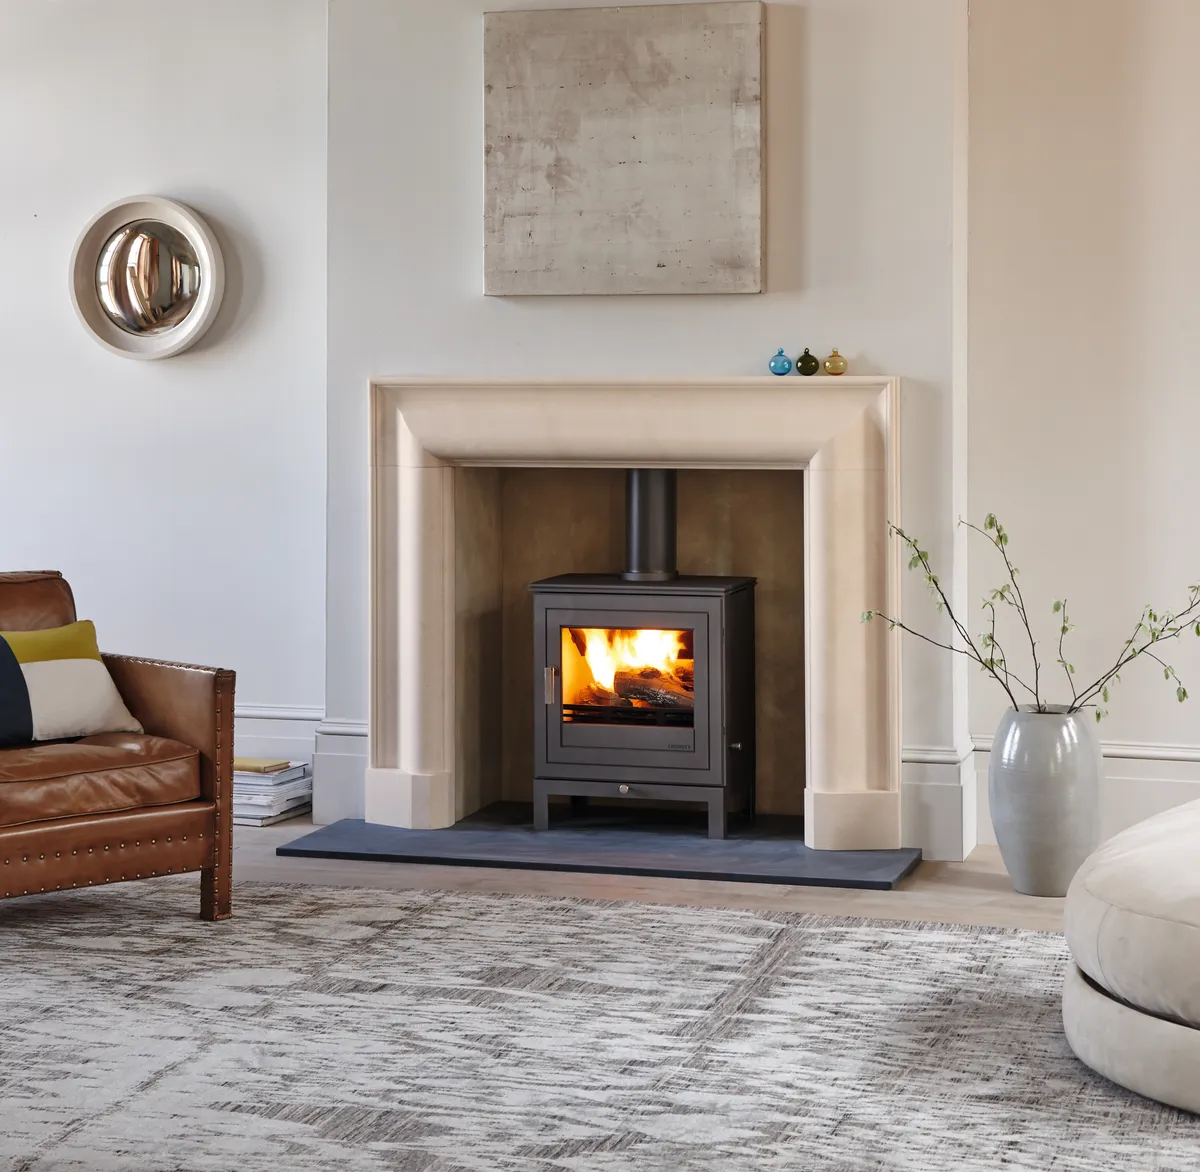 Shoreditch 8 Series multi-fuel stove in Black and Kent Bolection surround